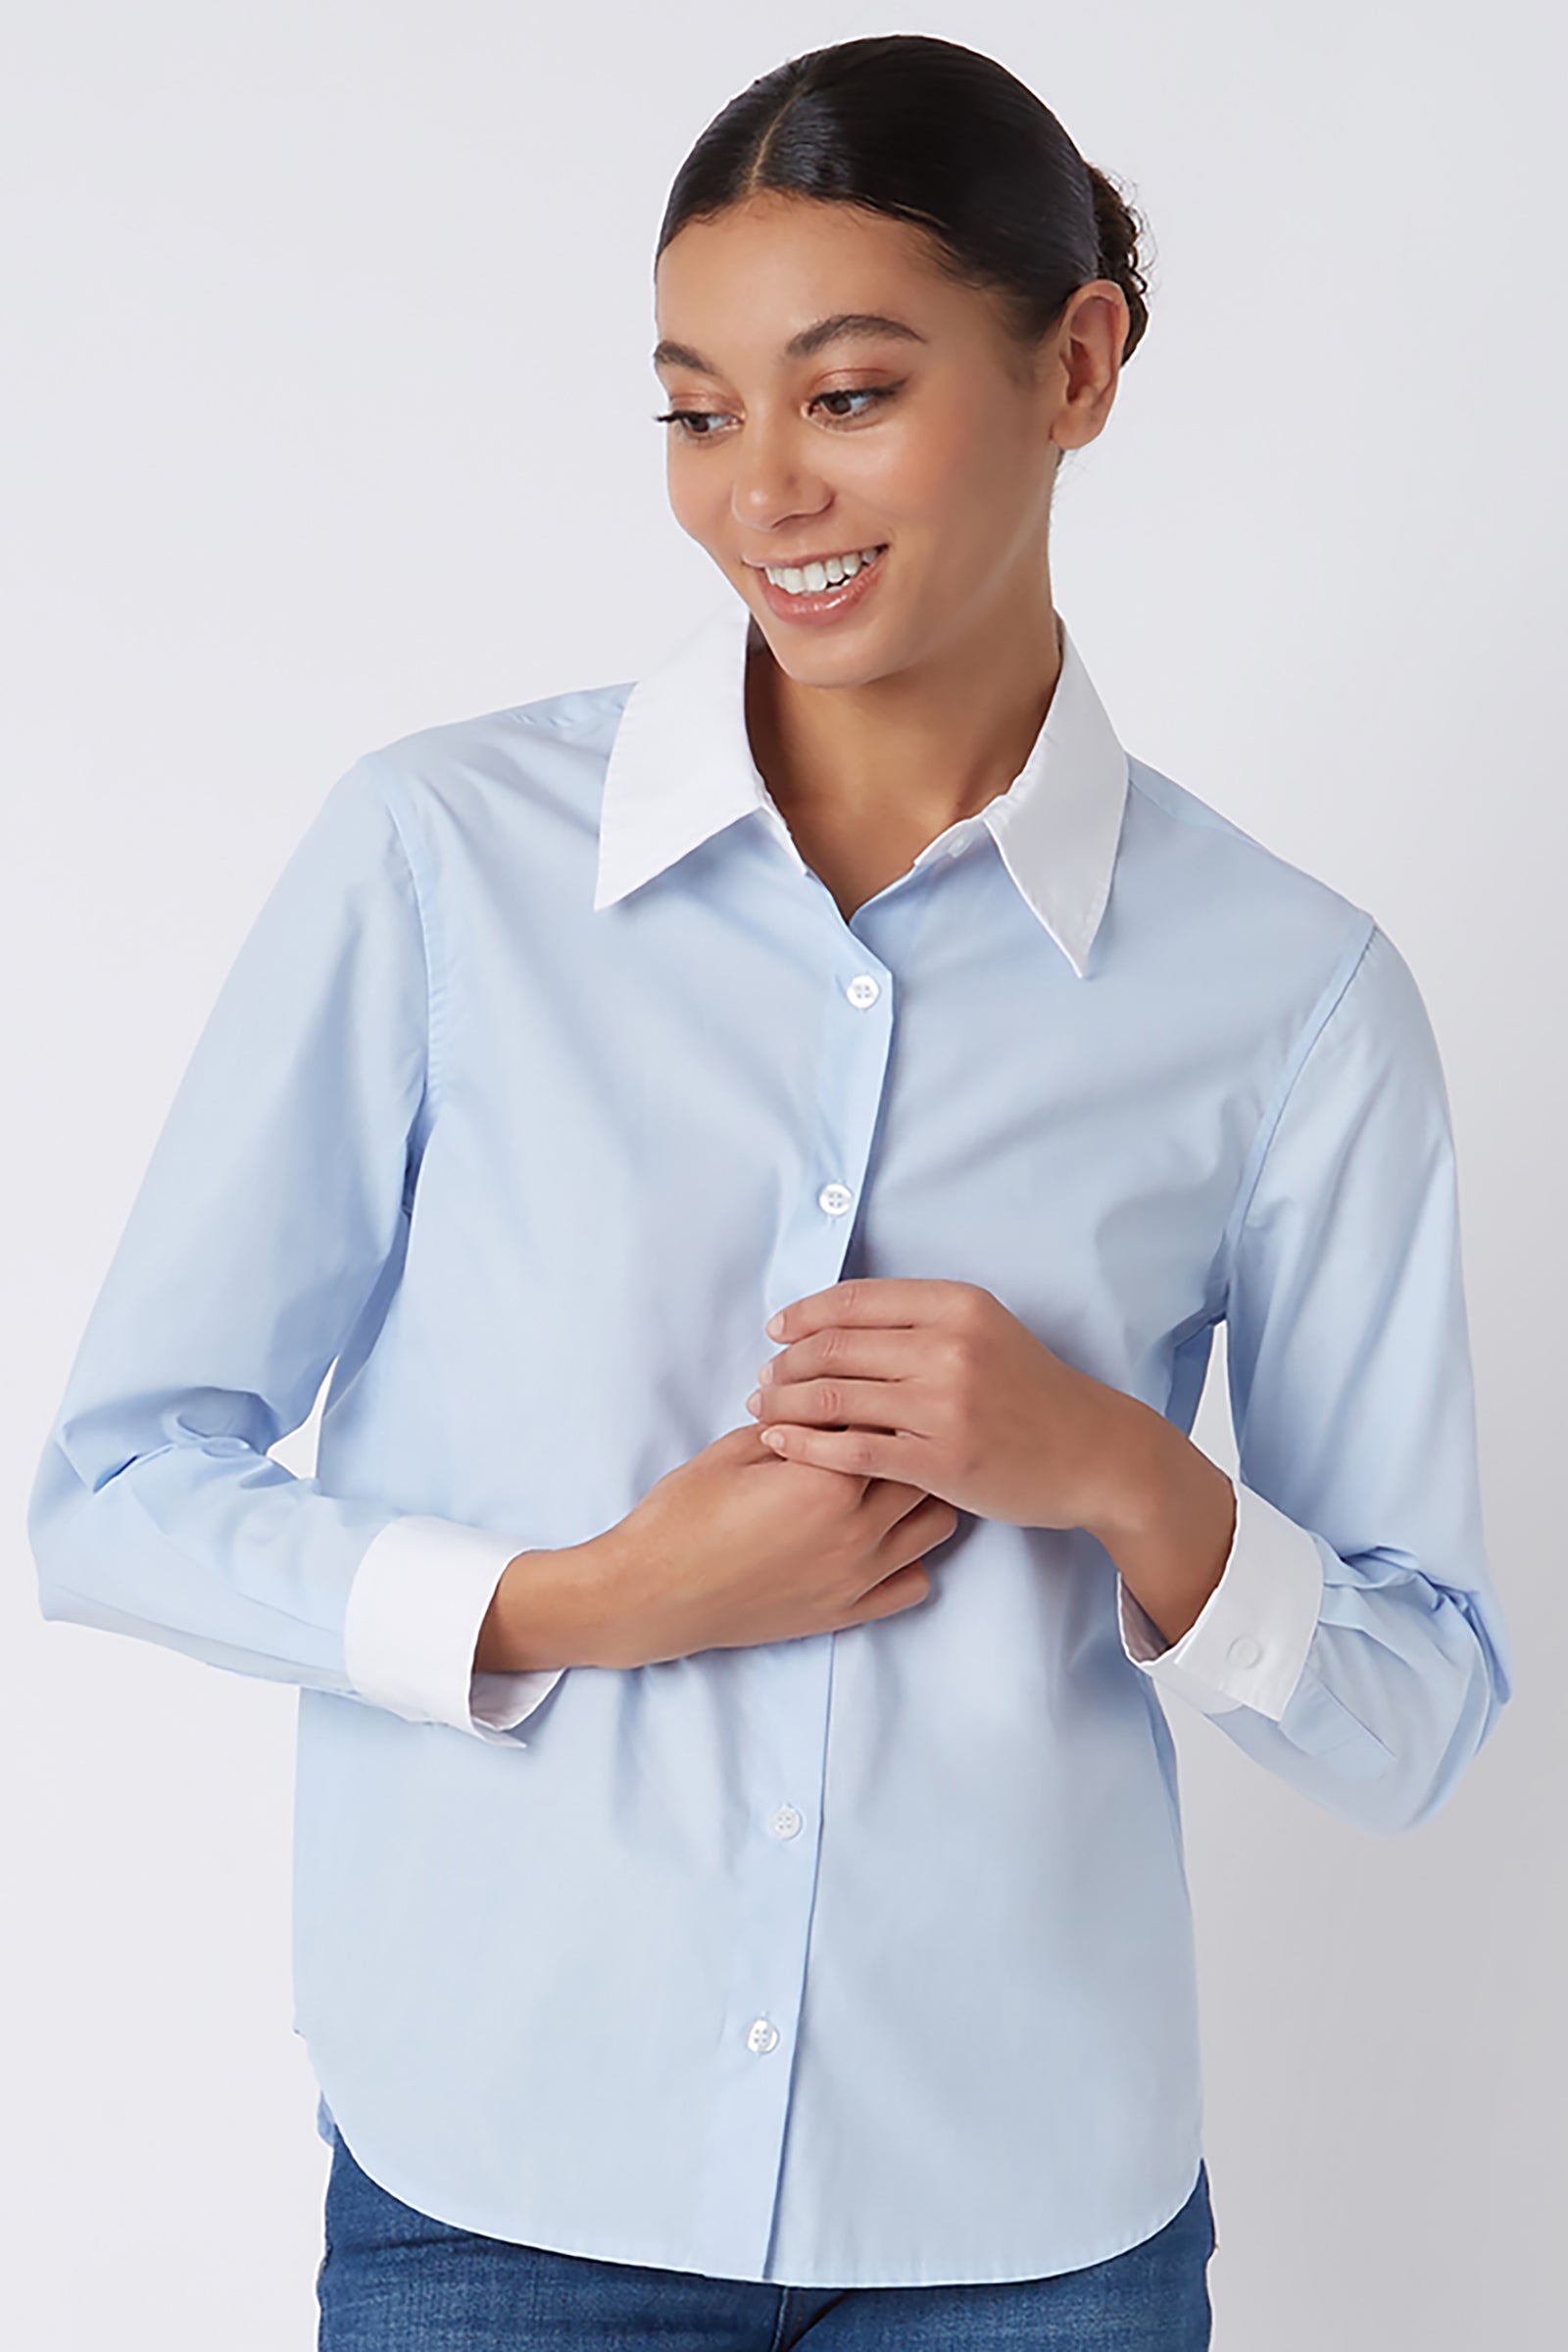 Kal Rieman Classic Tailored Shirt in Oxford Blue on Model Looking Down Cropped Front View